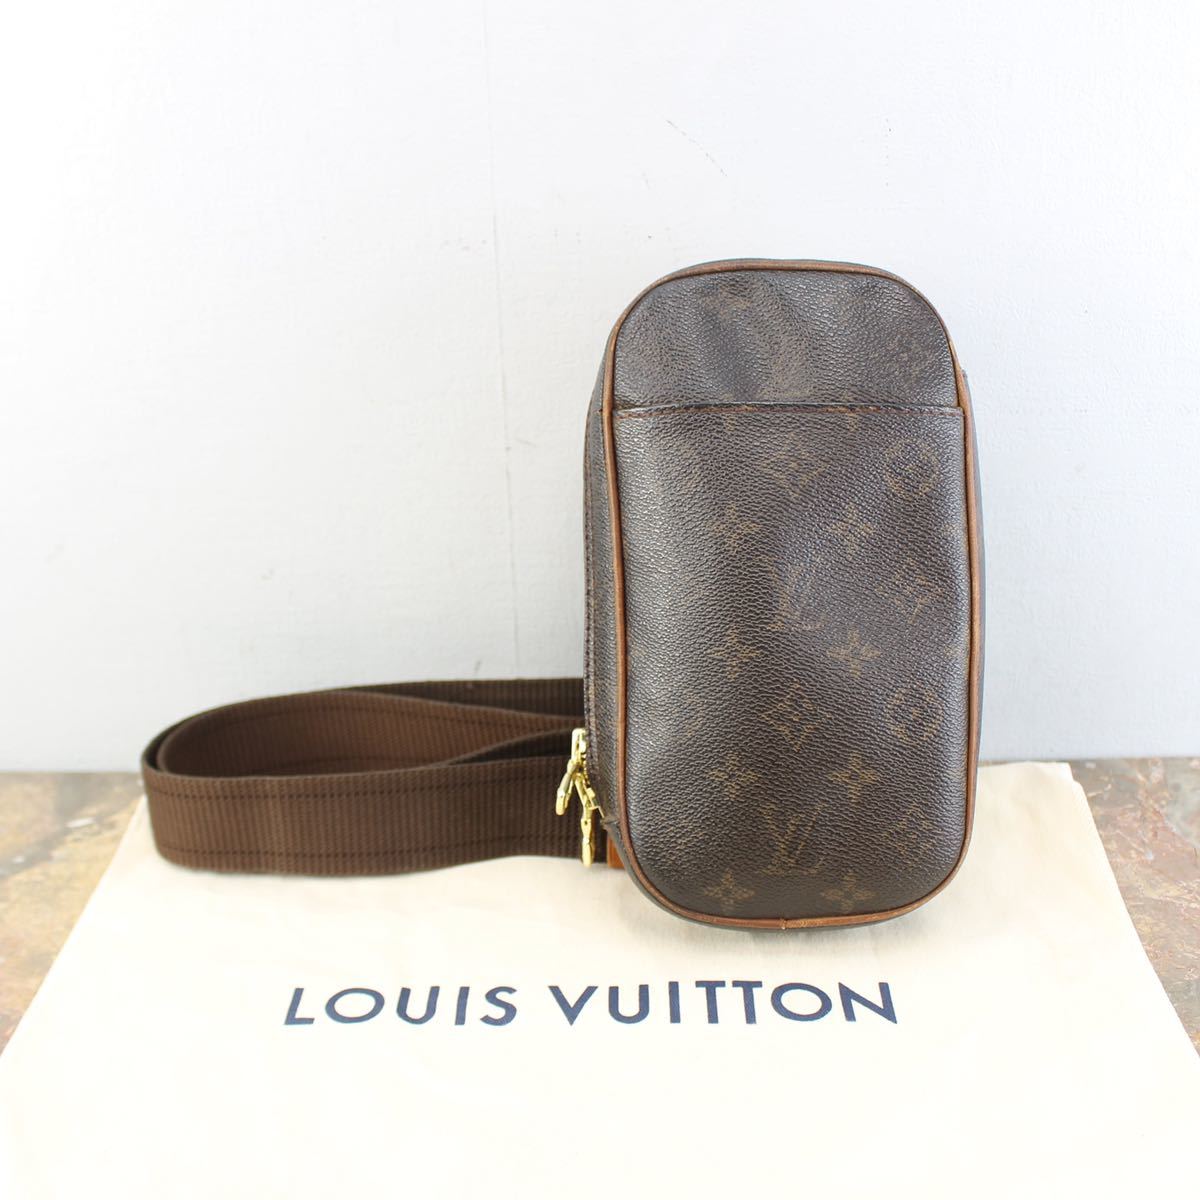 LOUIS VUITTON M51870 CA0010 MONOGRAM PATTERNED BODY BAG MADE IN